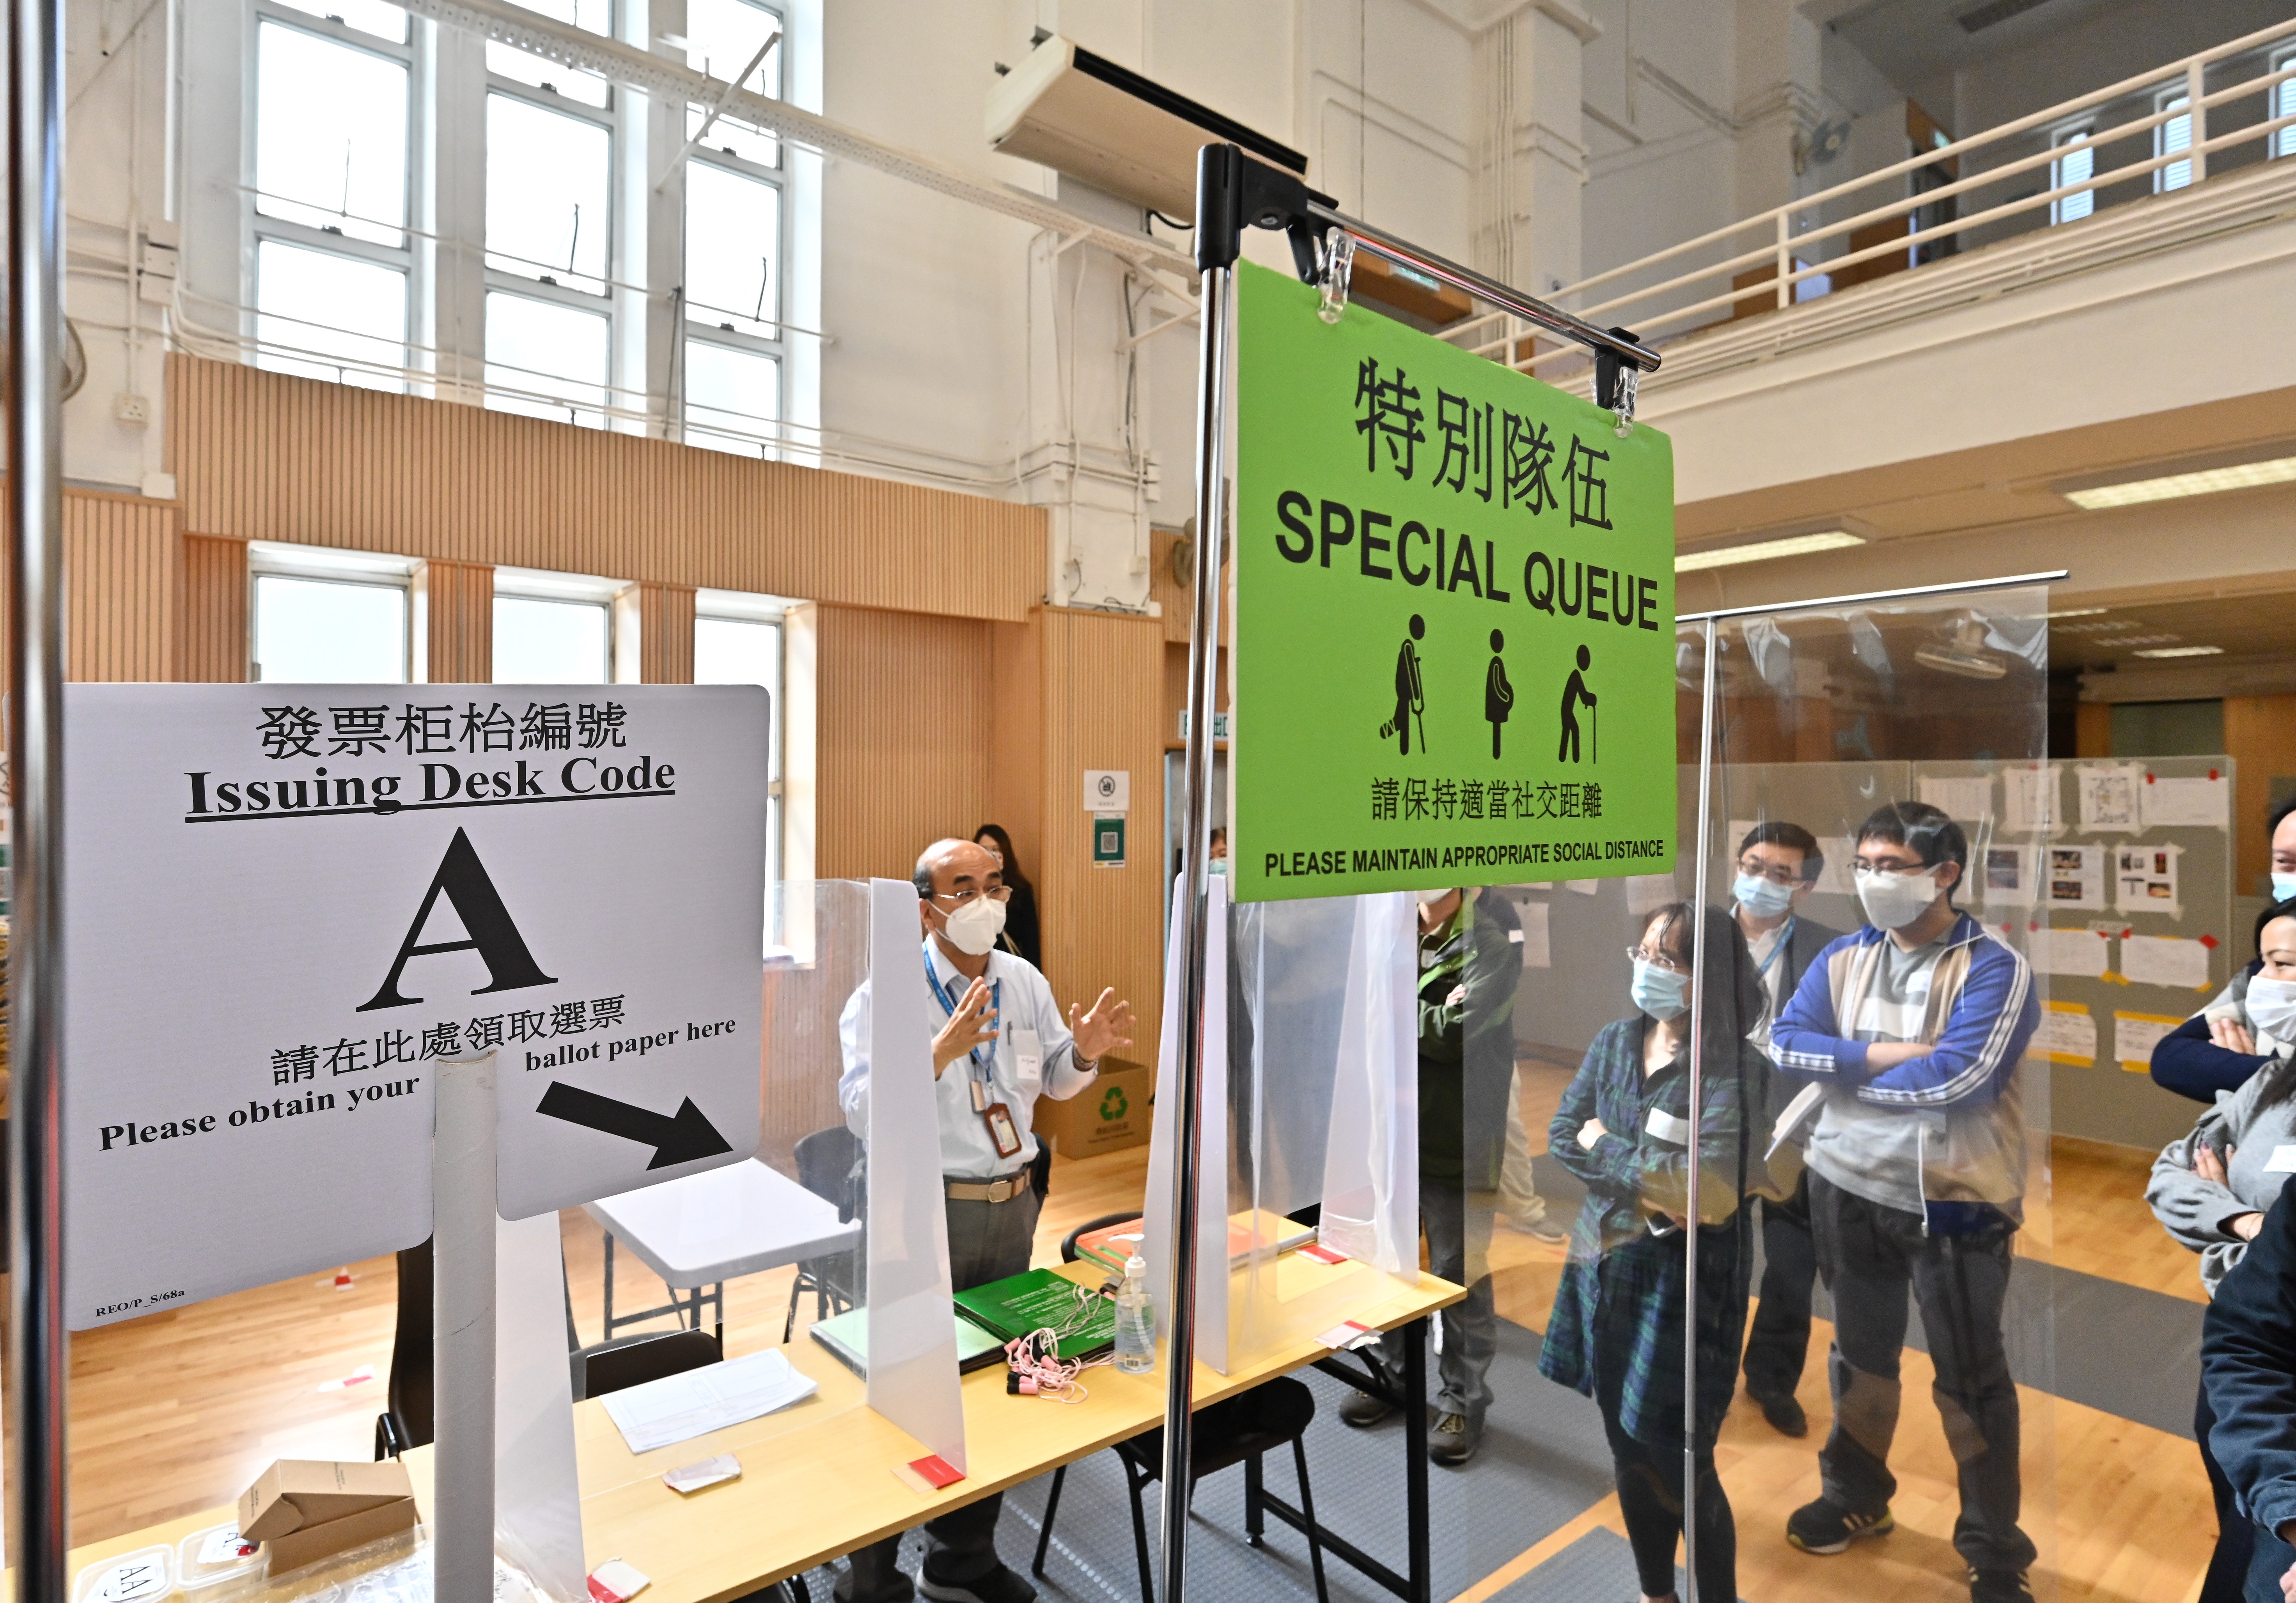 The 2021 Legislative Council General Election will be held on December 19. The Registration and Electoral Office (REO) arranged in the past two weeks training and practice sessions with simulated scenarios for staff who will work in polling, counting and central counting stations. Photo shows staff being briefed by a representative from the REO on the queuing arrangements in polling stations.